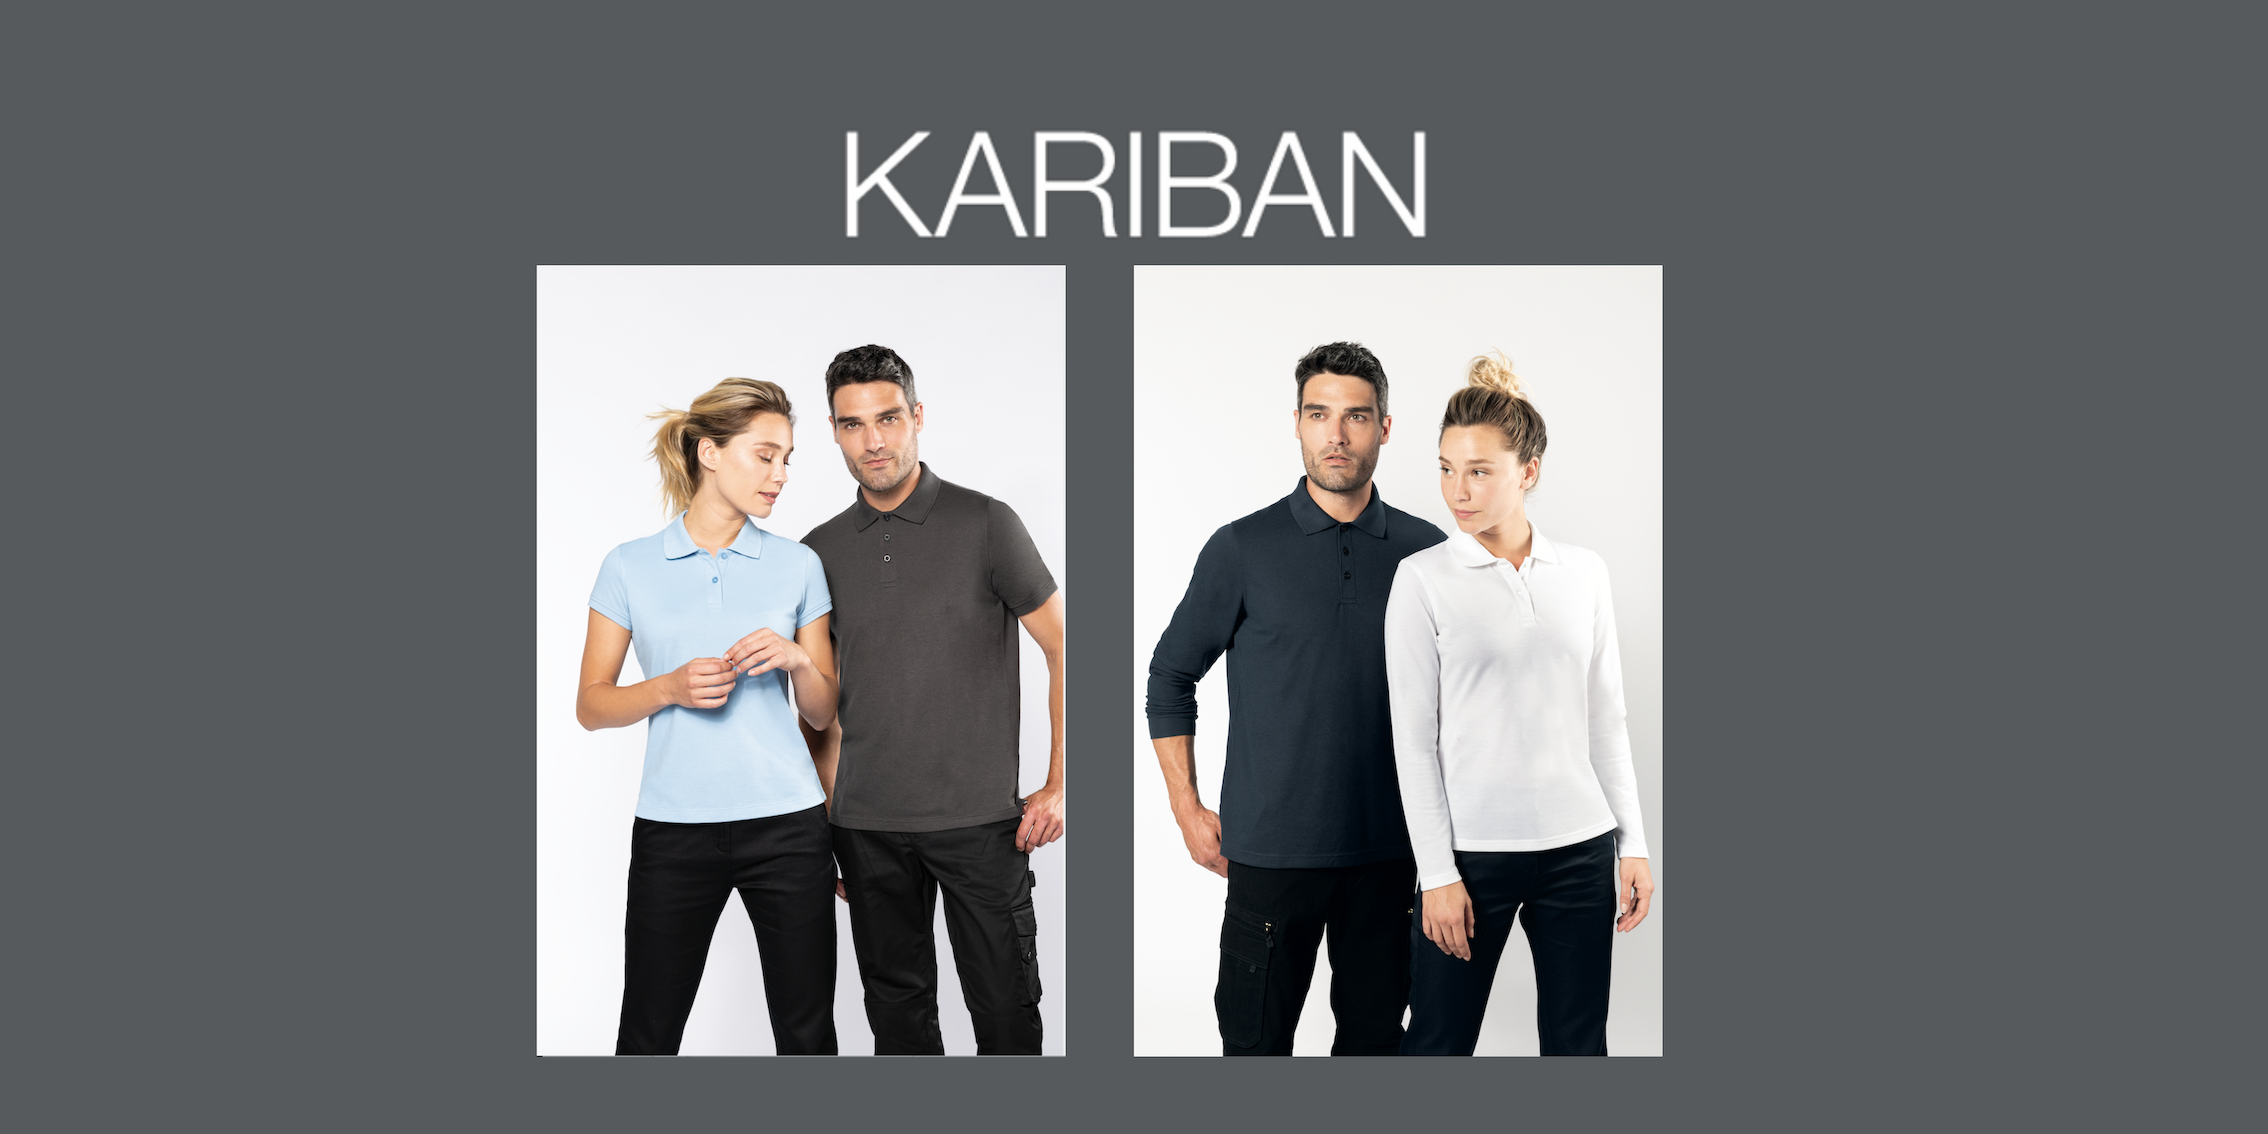 INTERVIEW: OUR QUESTIONS TO KARIBAN BY TOPTEX, EXHIBITOR 2020